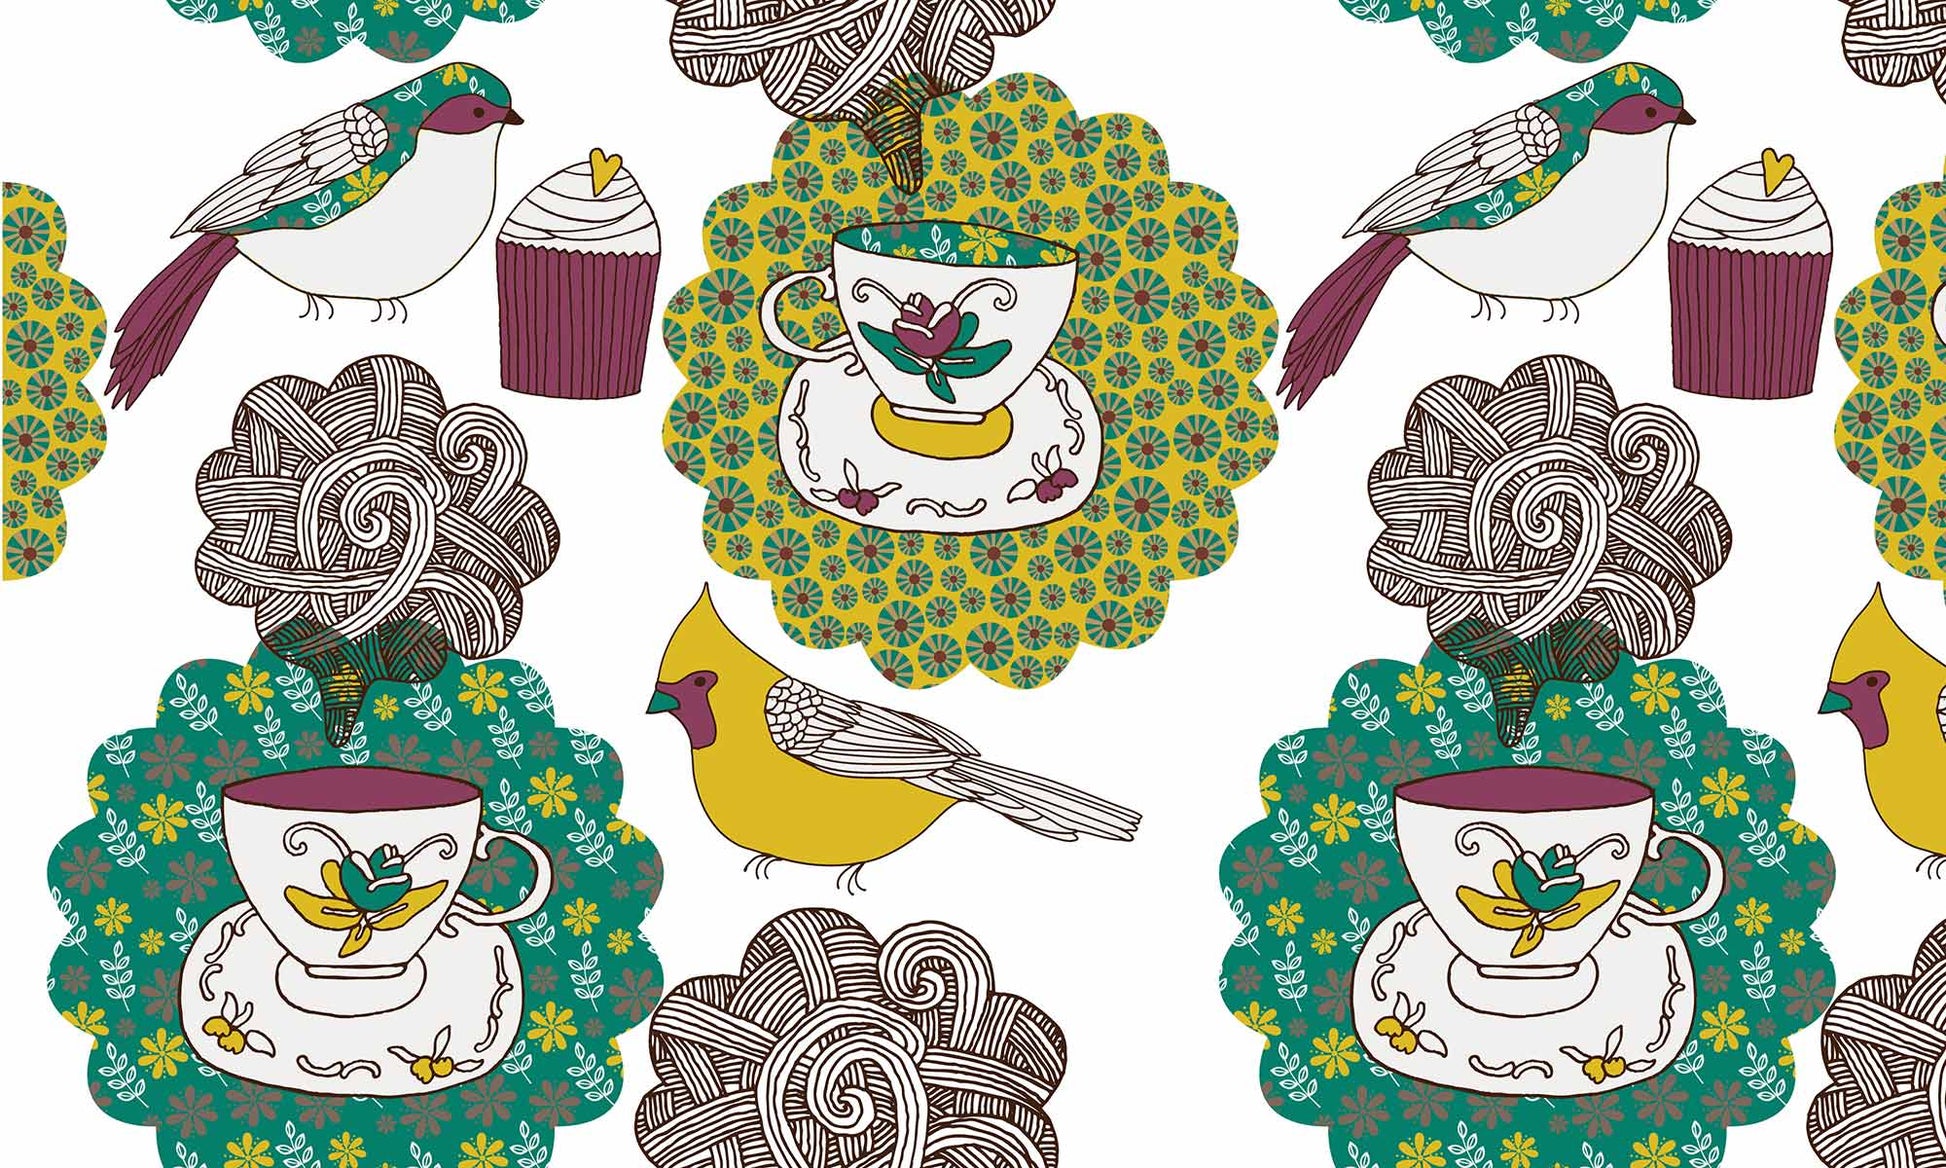 Birdie Teapot is a colourful wallpaper artwork for home decoration.